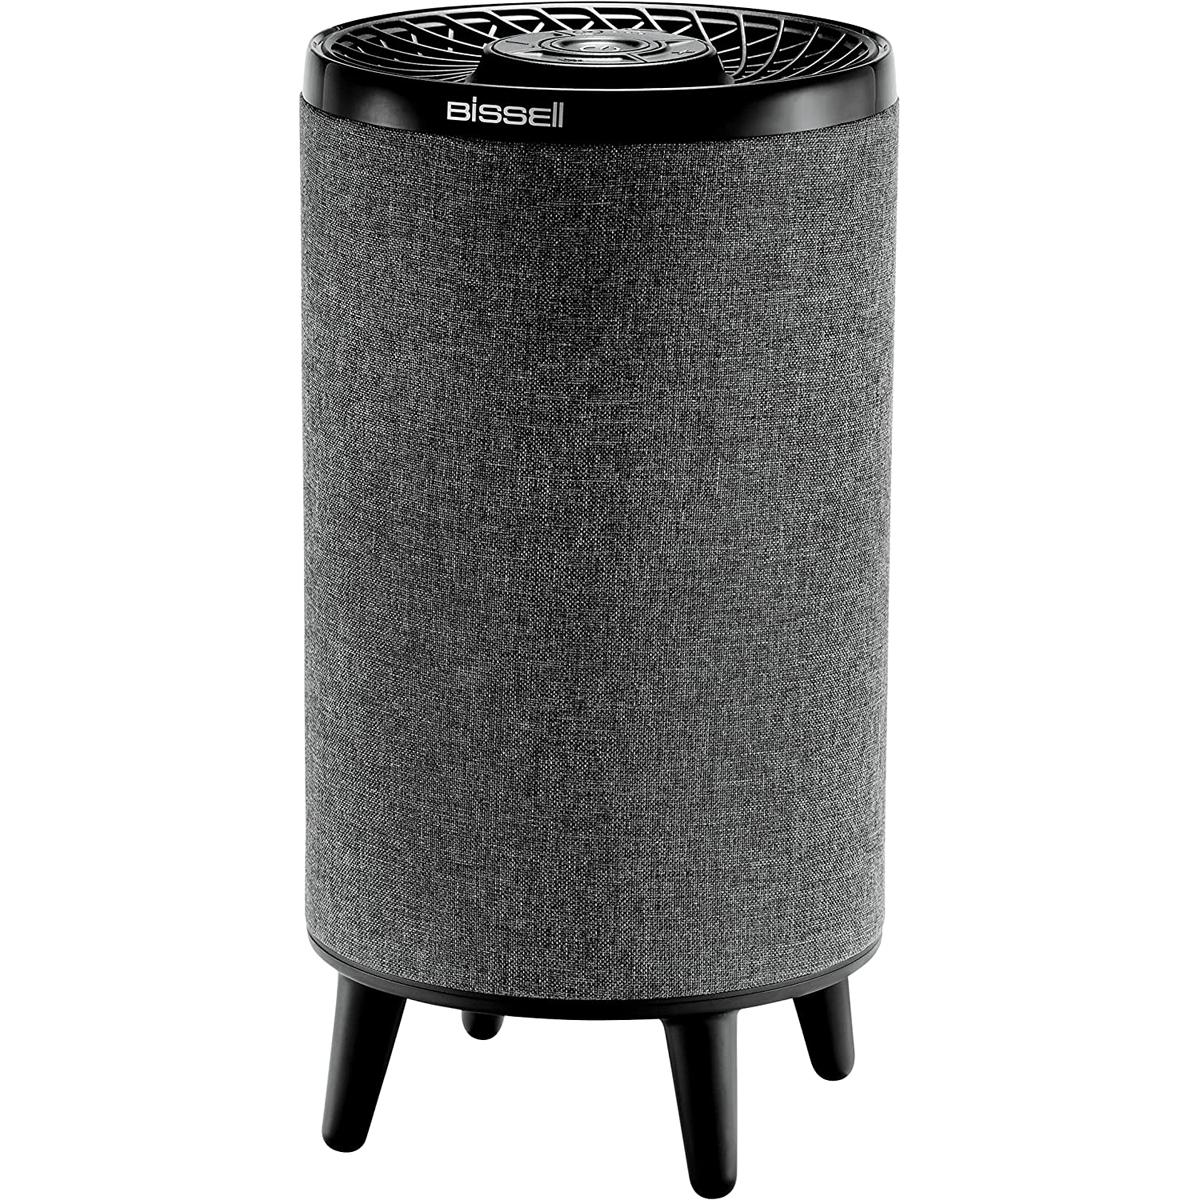 Bissell MYair HUB Air Purifier with HEPA Filter for $58.92 Shipped